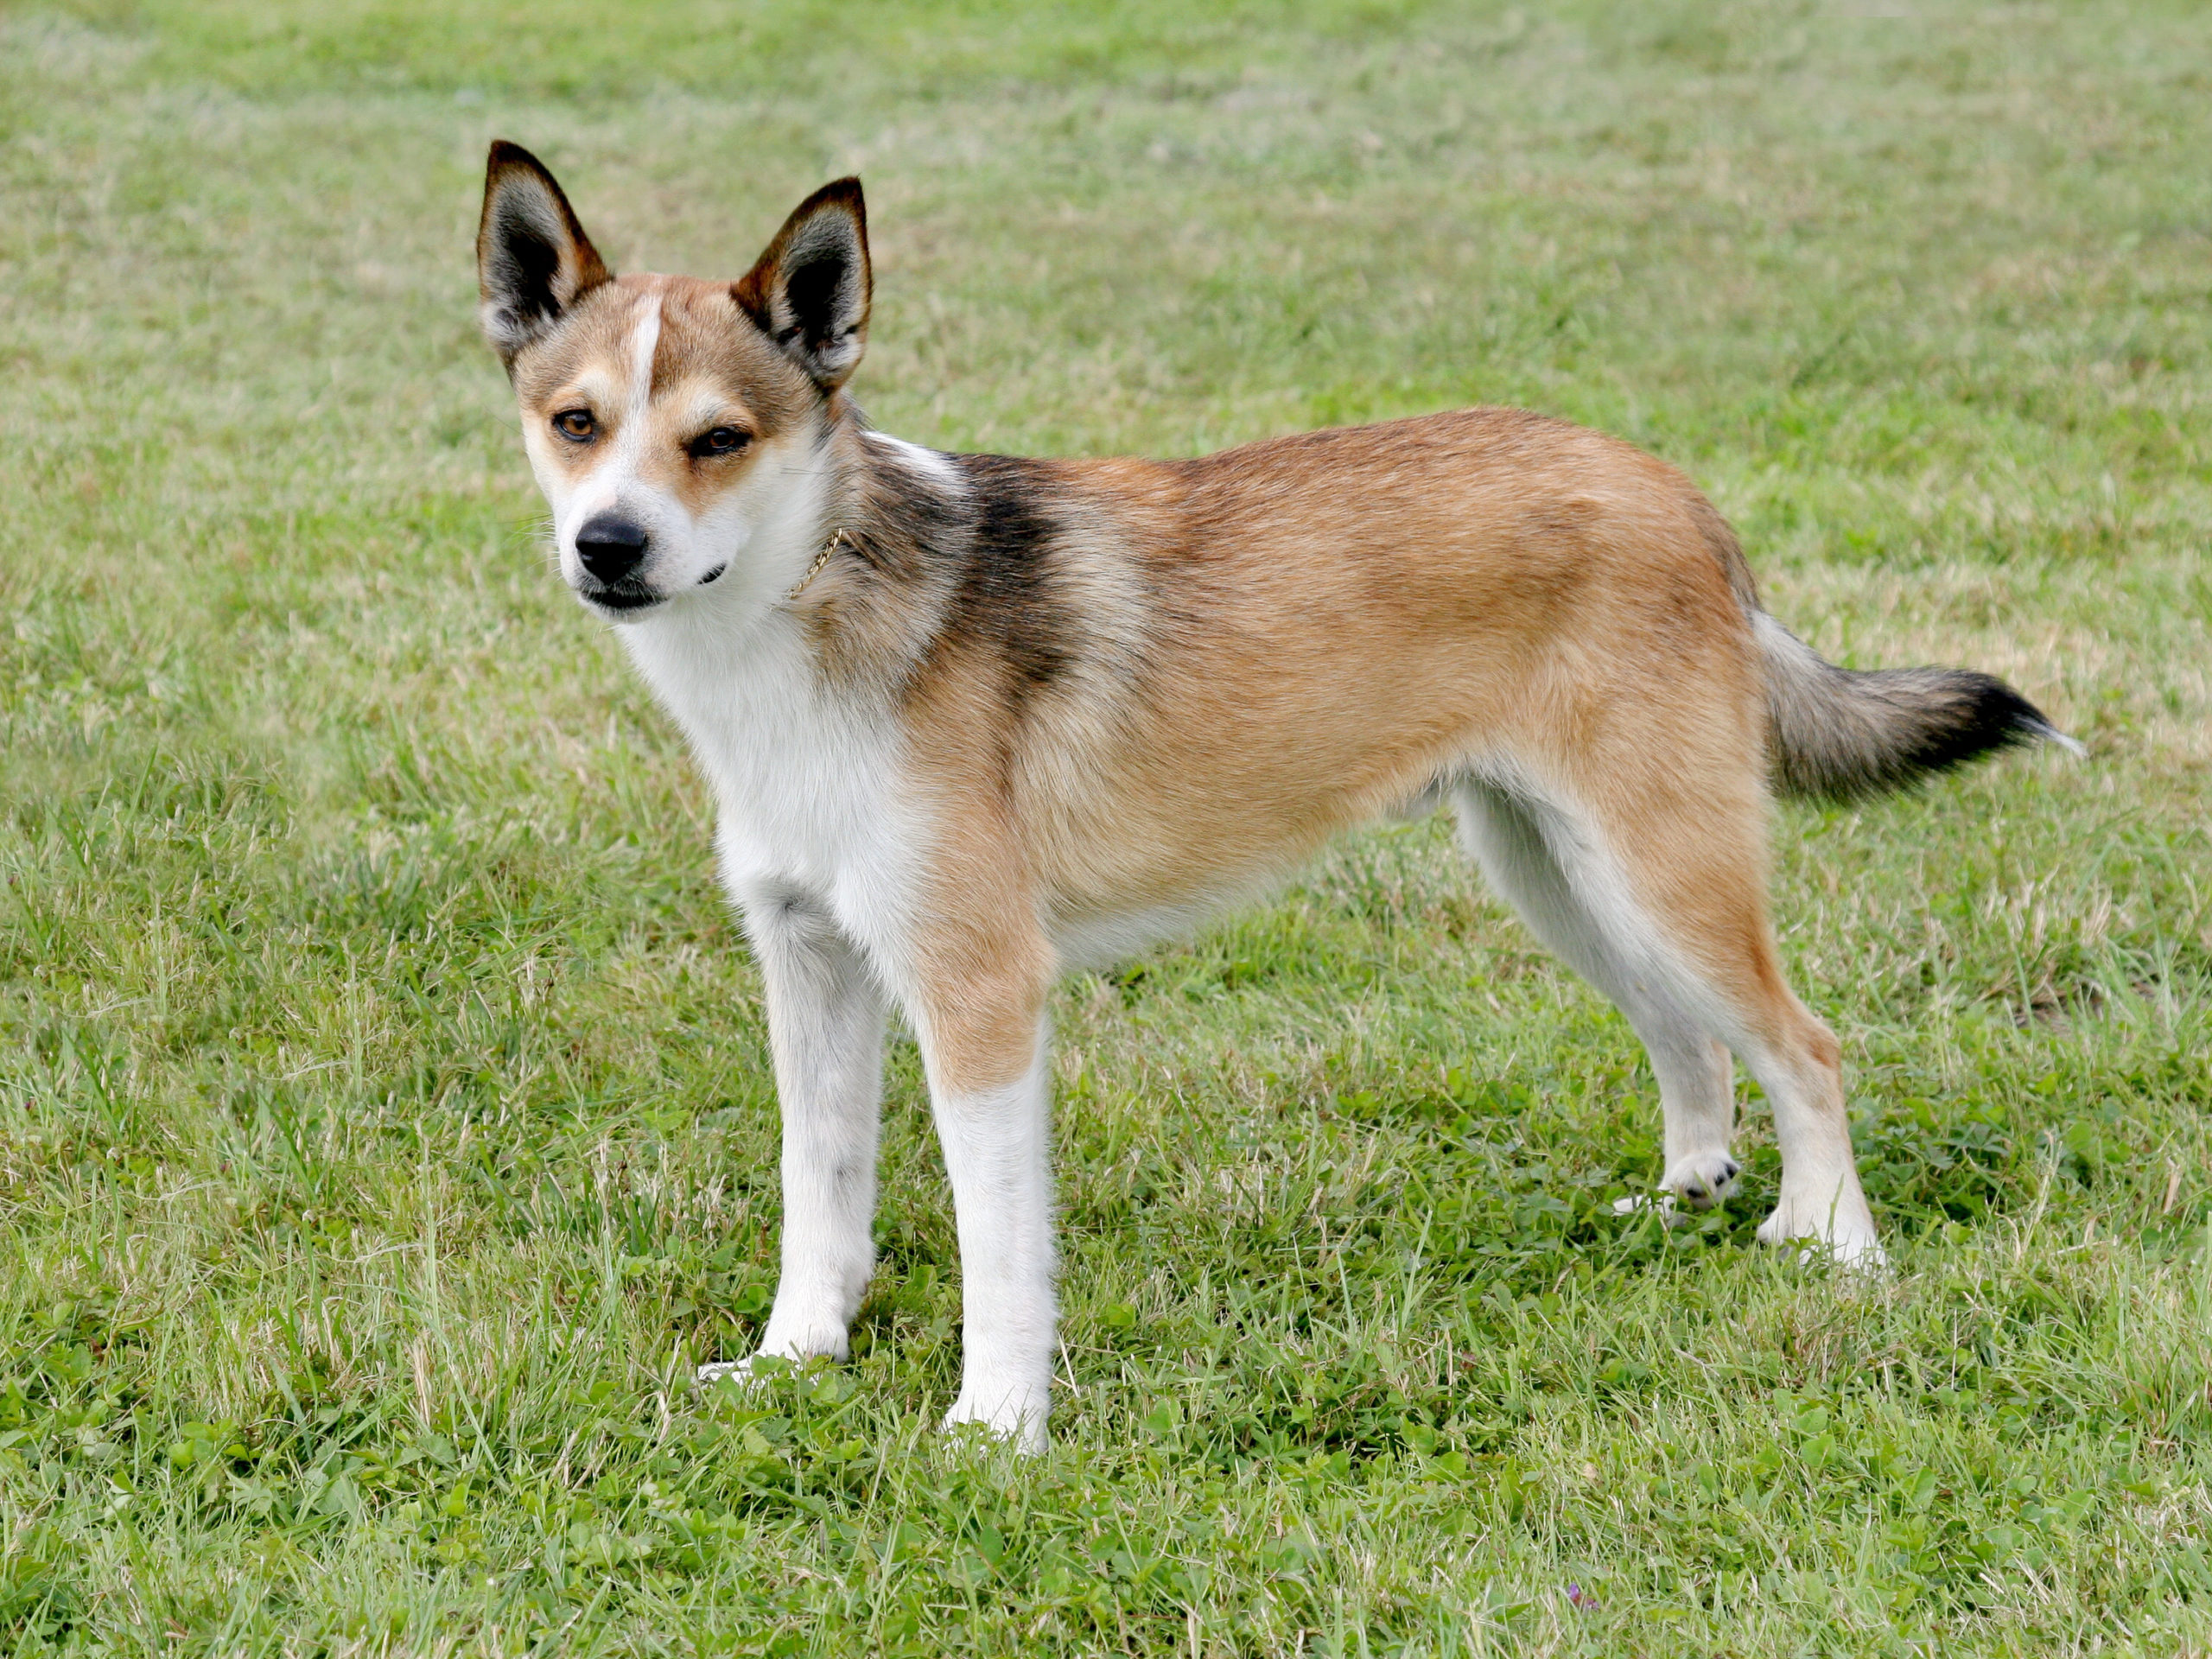 25 Newest Dog Breeds The AKC Has Recognized The Delite